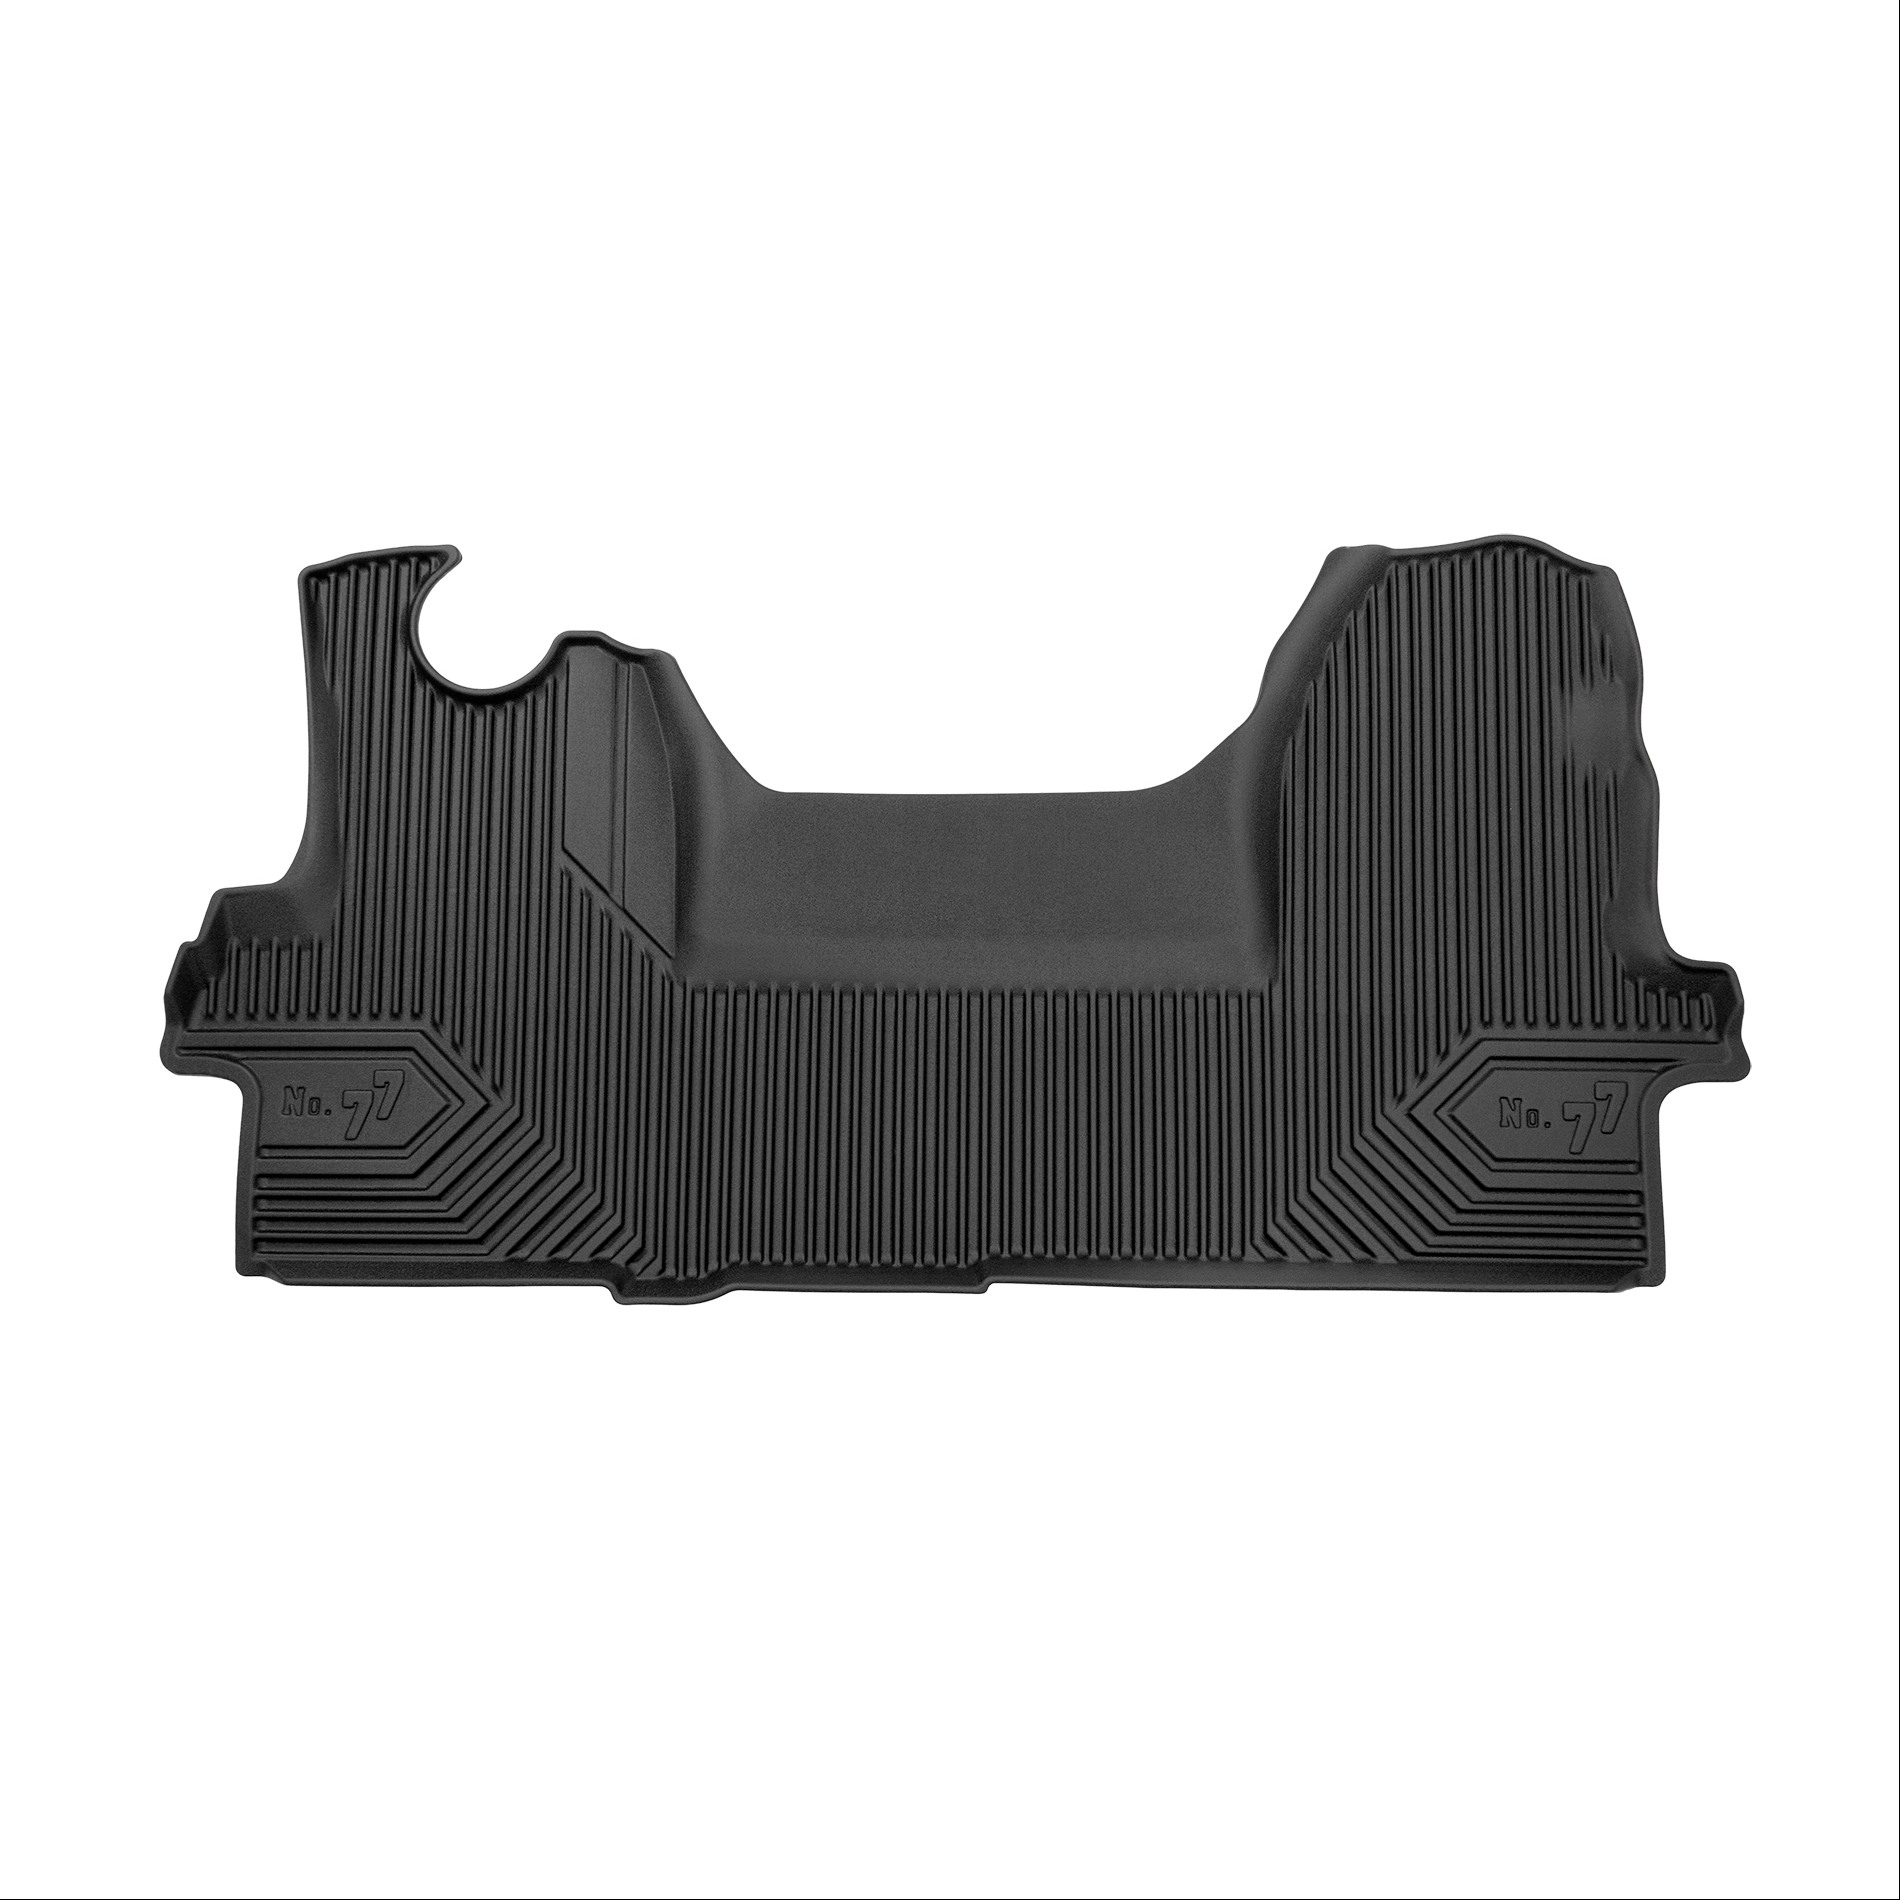 Car mats No77 for Iveco Daily (Pre-Facelift) 1996-2006 1pc Frogum